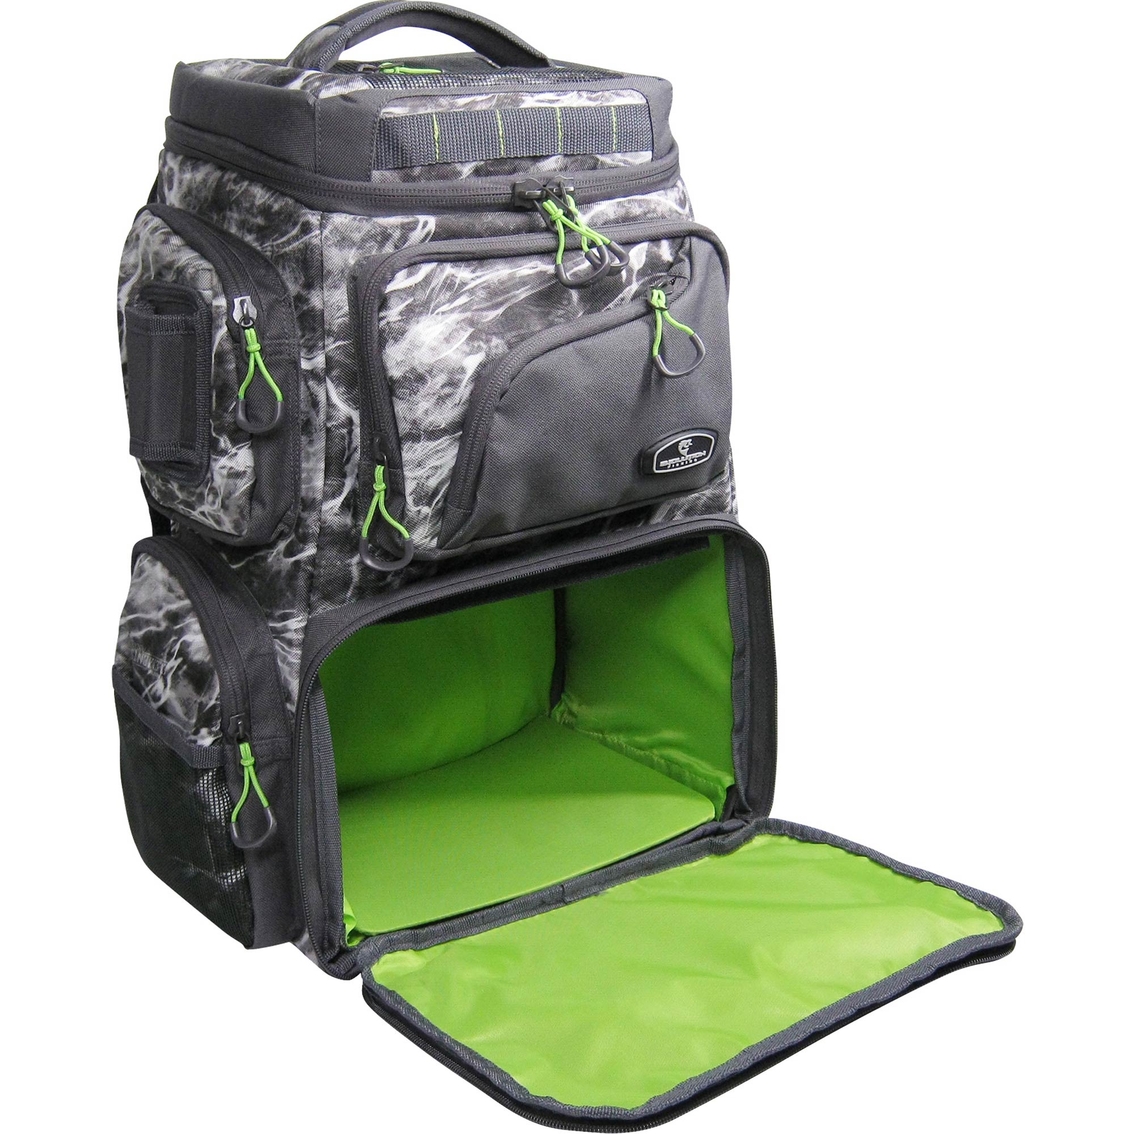 Evolution Outdoors Largemouth 3600 Backpack - Image 5 of 6